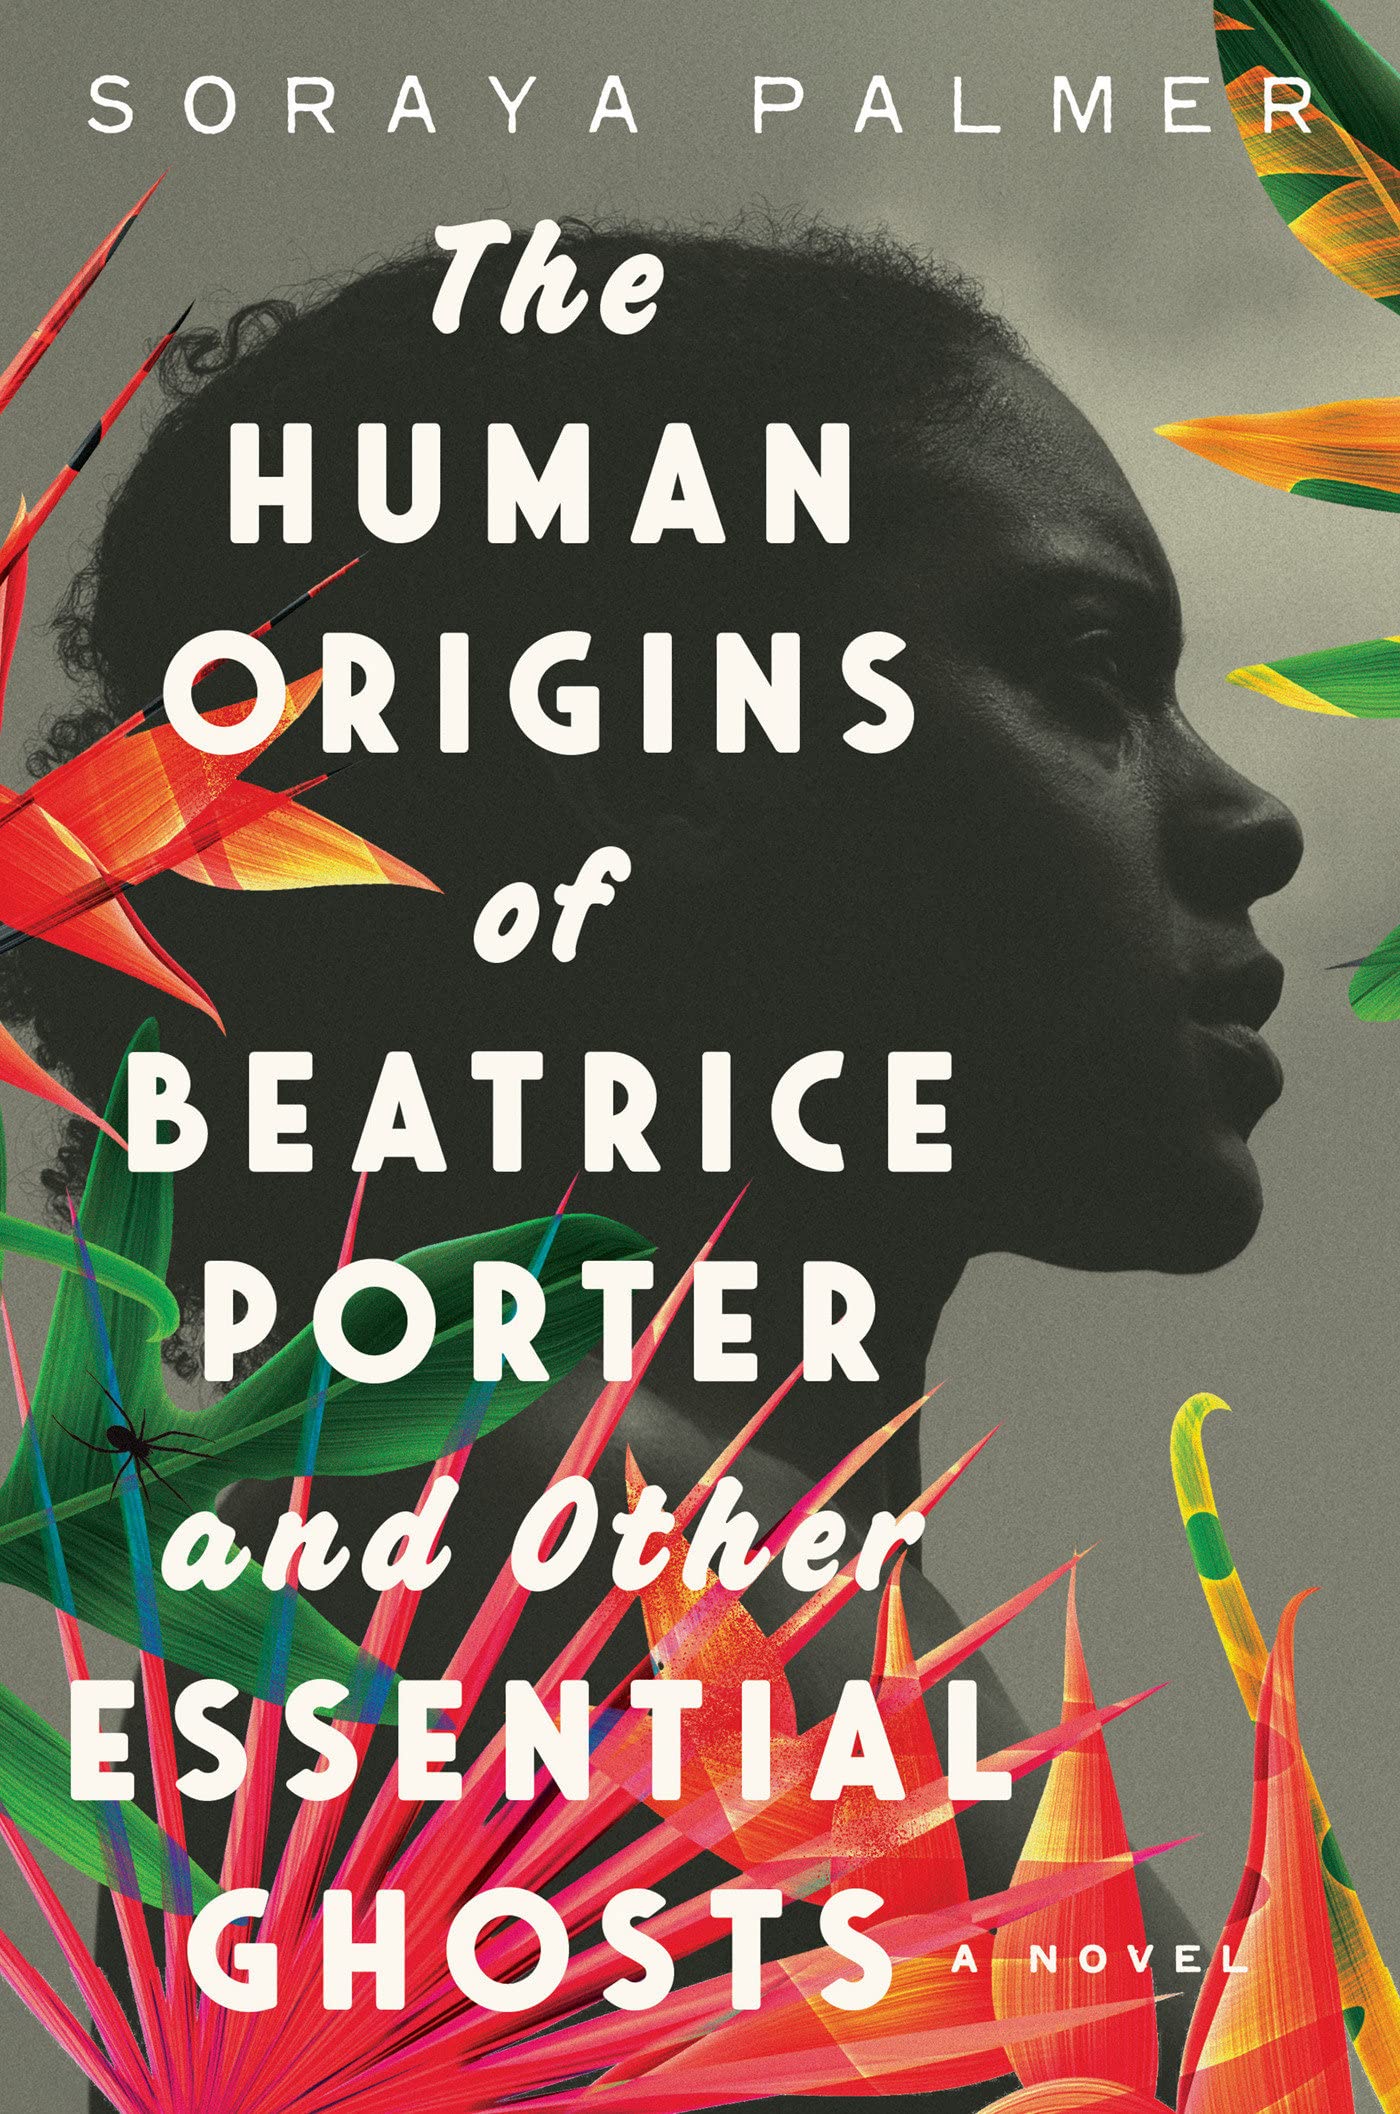 Soraya Palmer: Human Origins of Beatrice Porter and Other Essential Ghosts (2023, Serpent's Tail Limited)